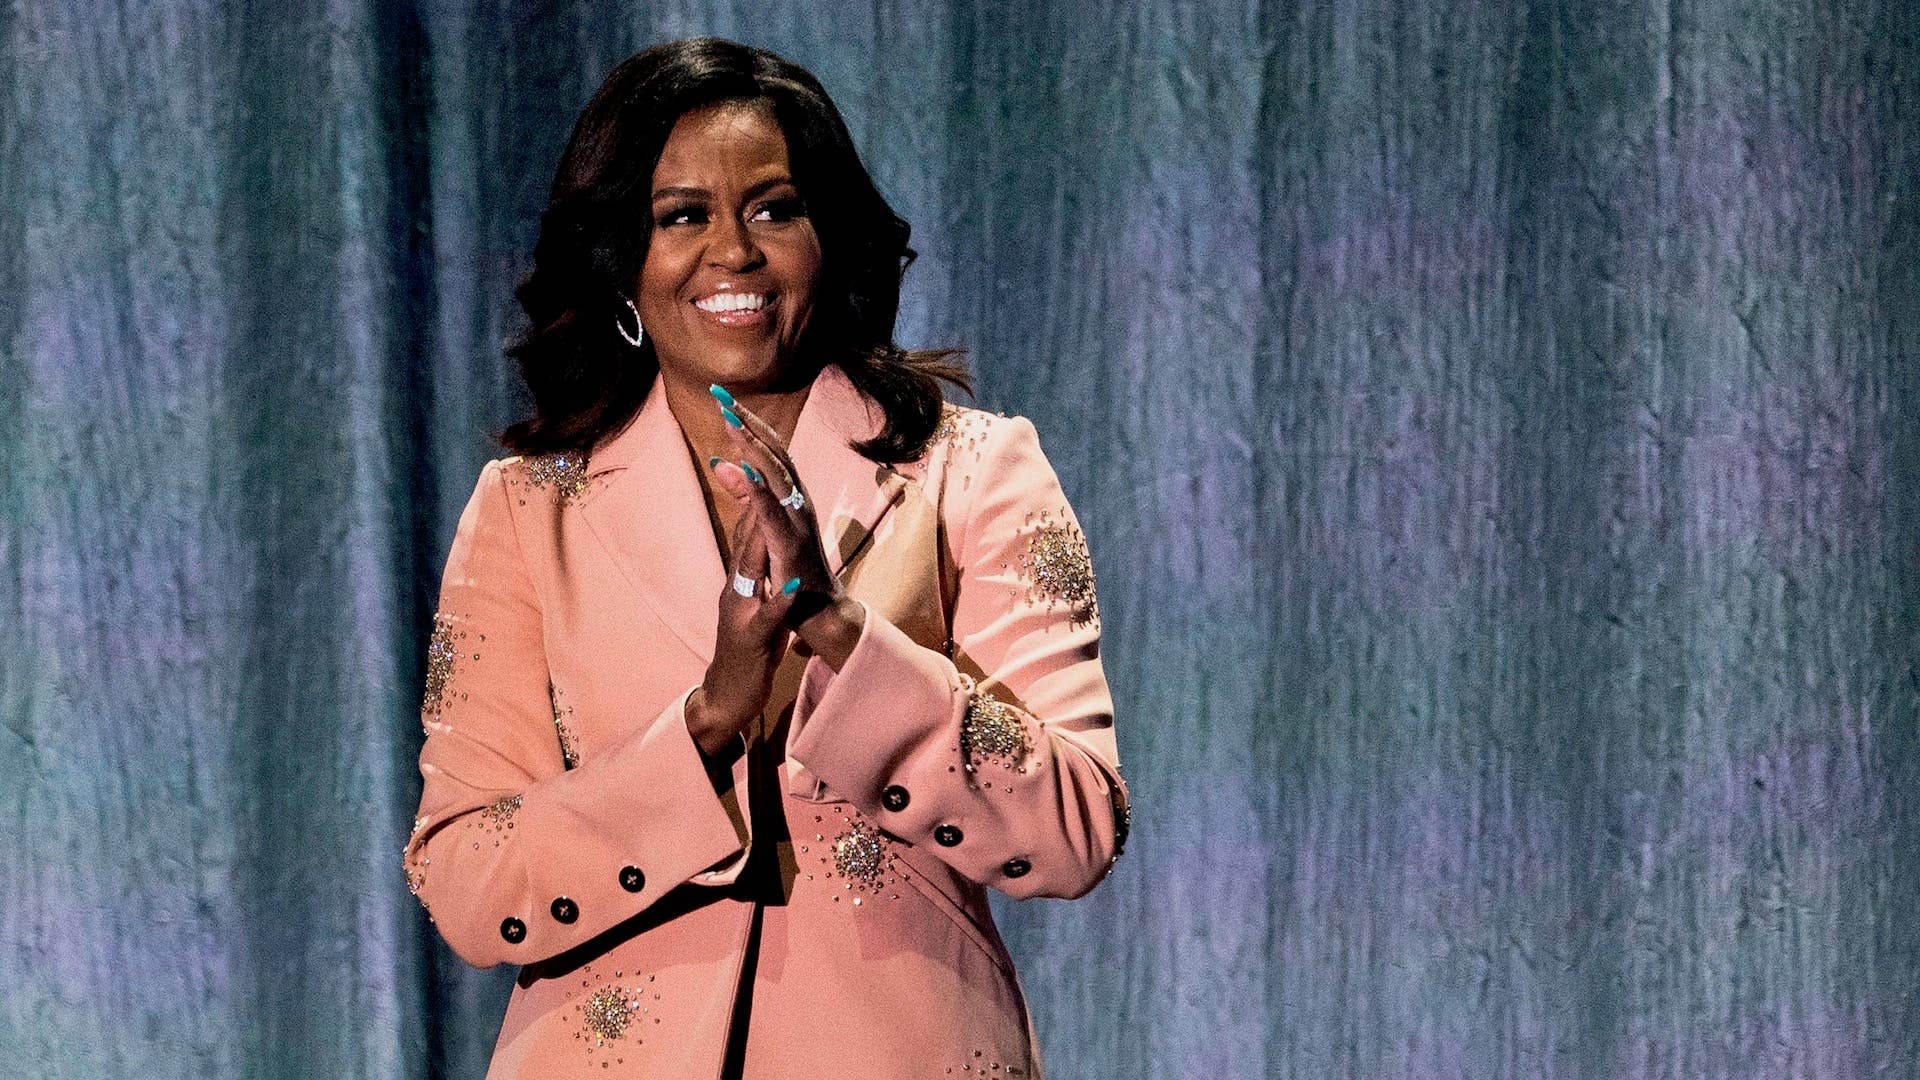 Former US first lady Michelle Obama gestures on stage of the Royal Arena